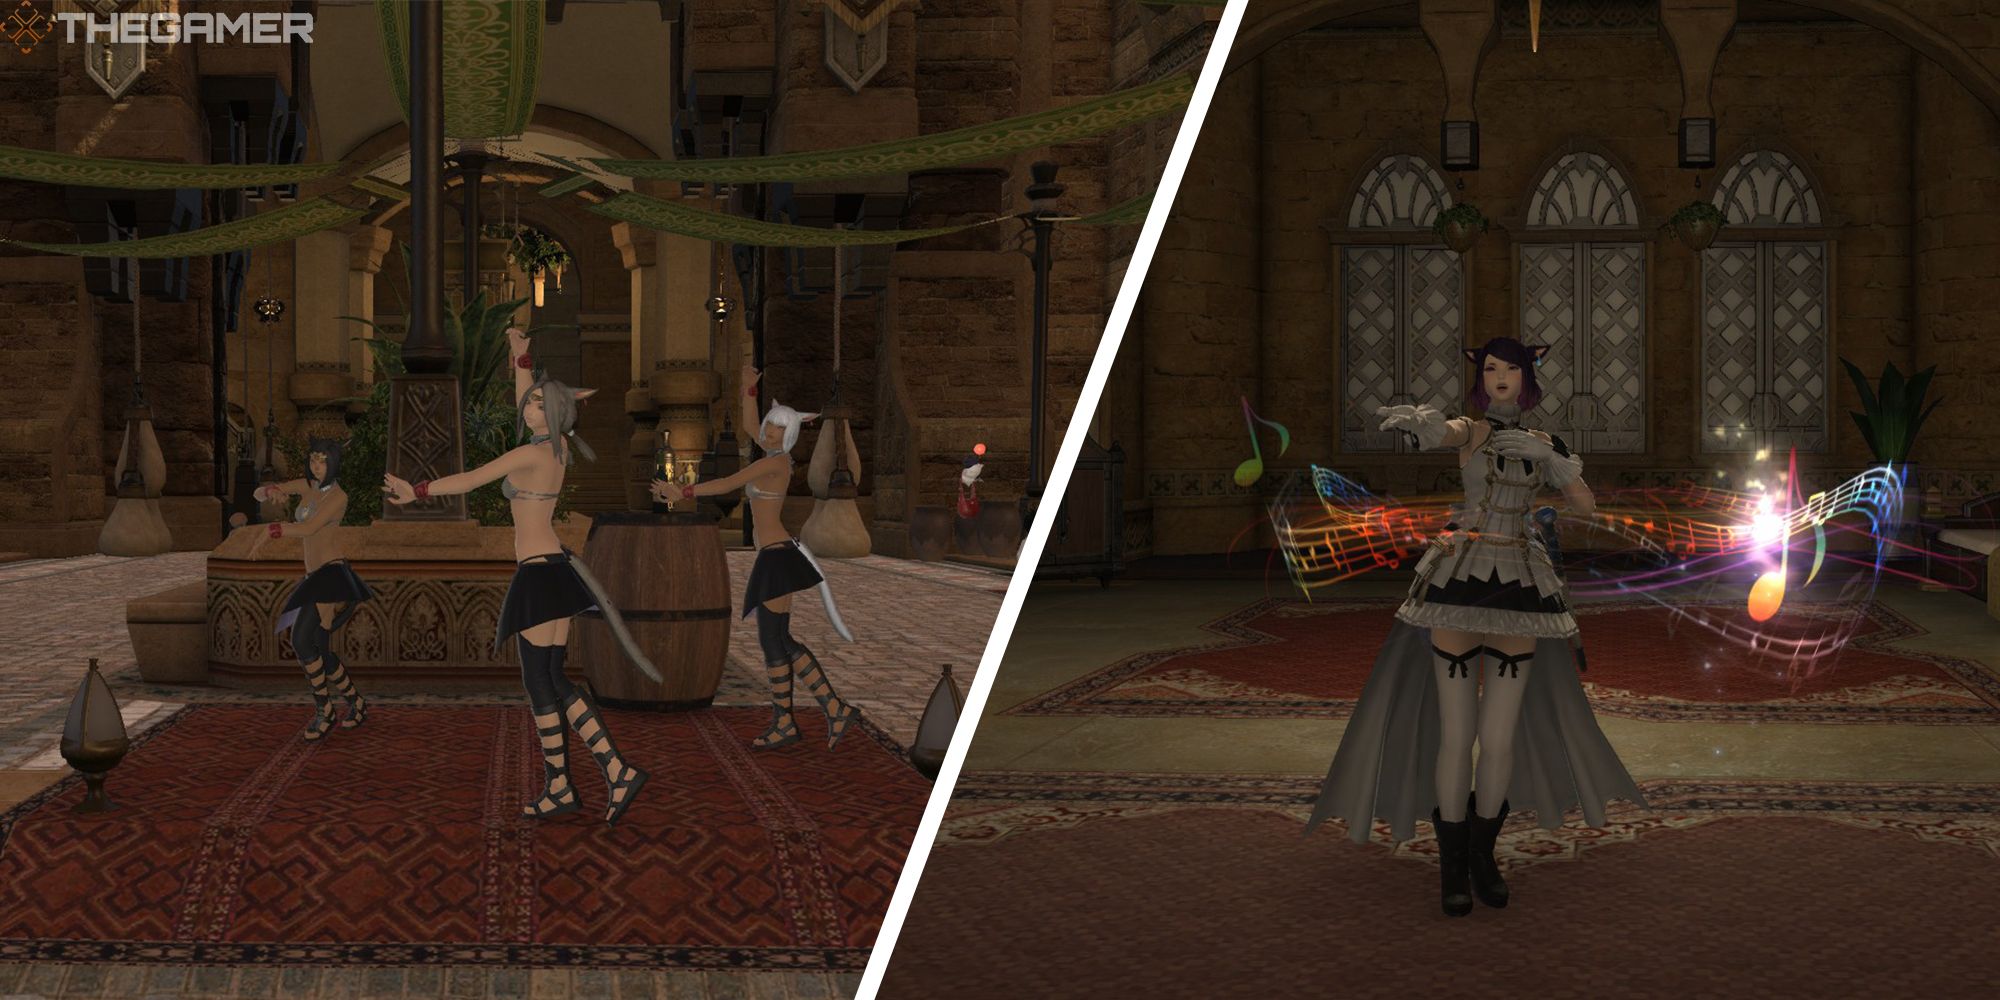 Final Fantasy 14 Every Dance Emote And How To Get It